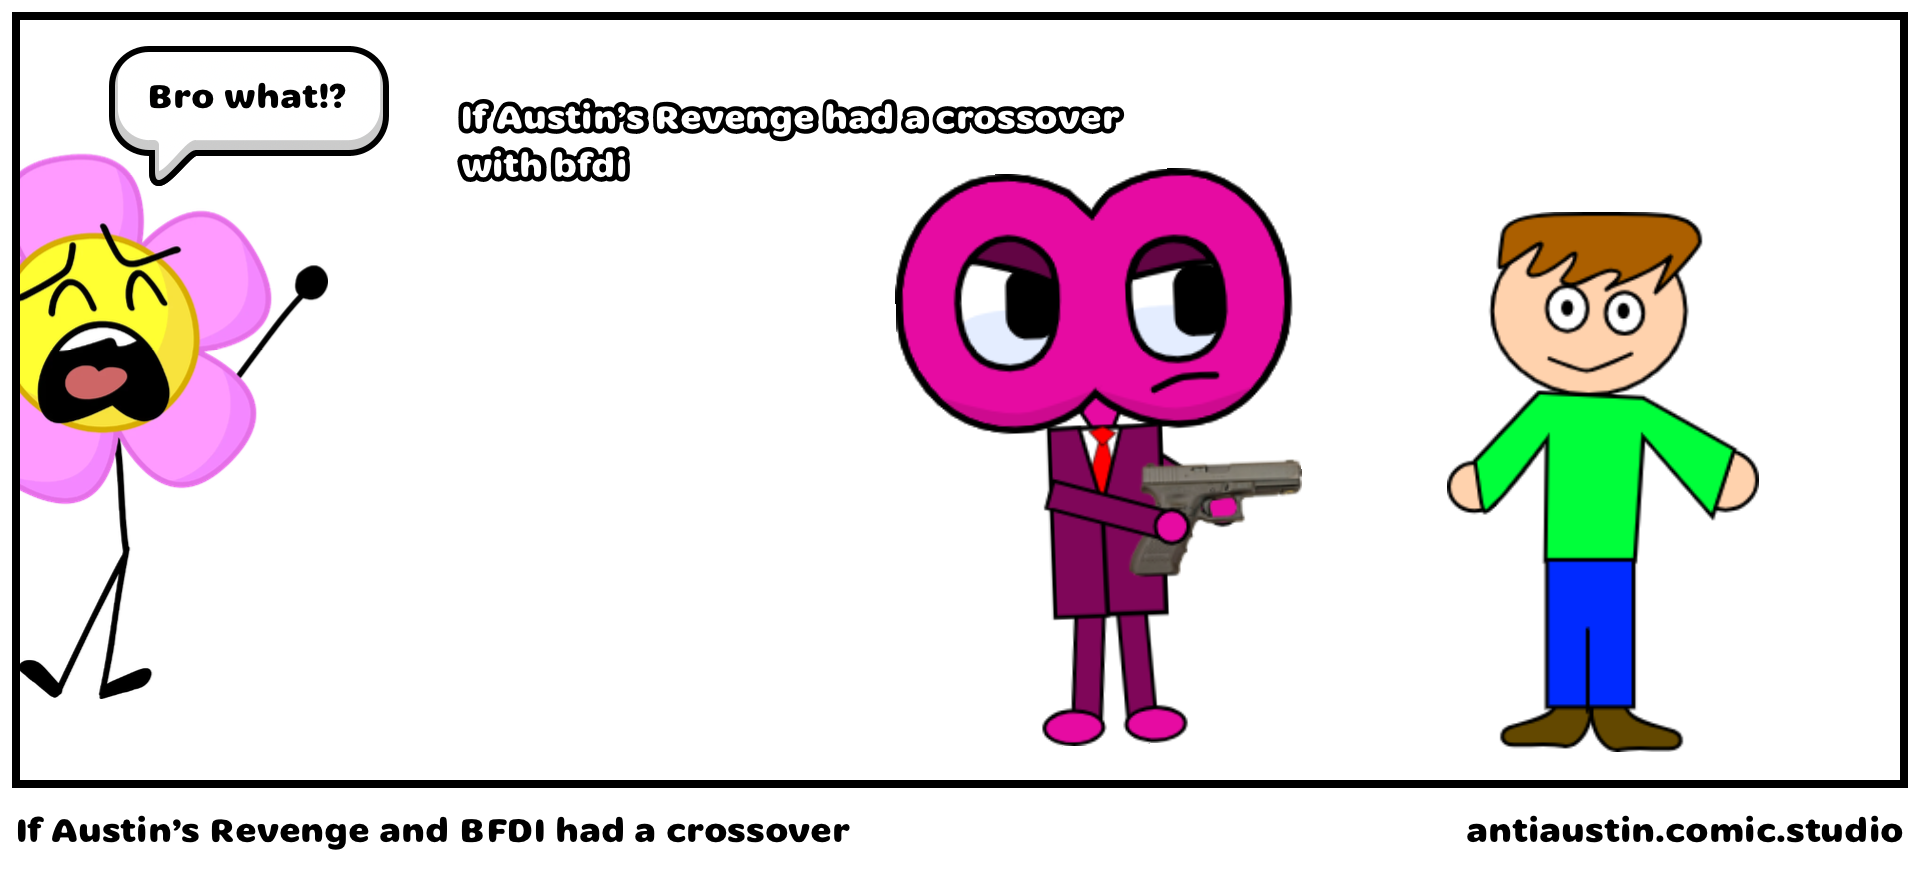 If Austin’s Revenge and BFDI had a crossover 